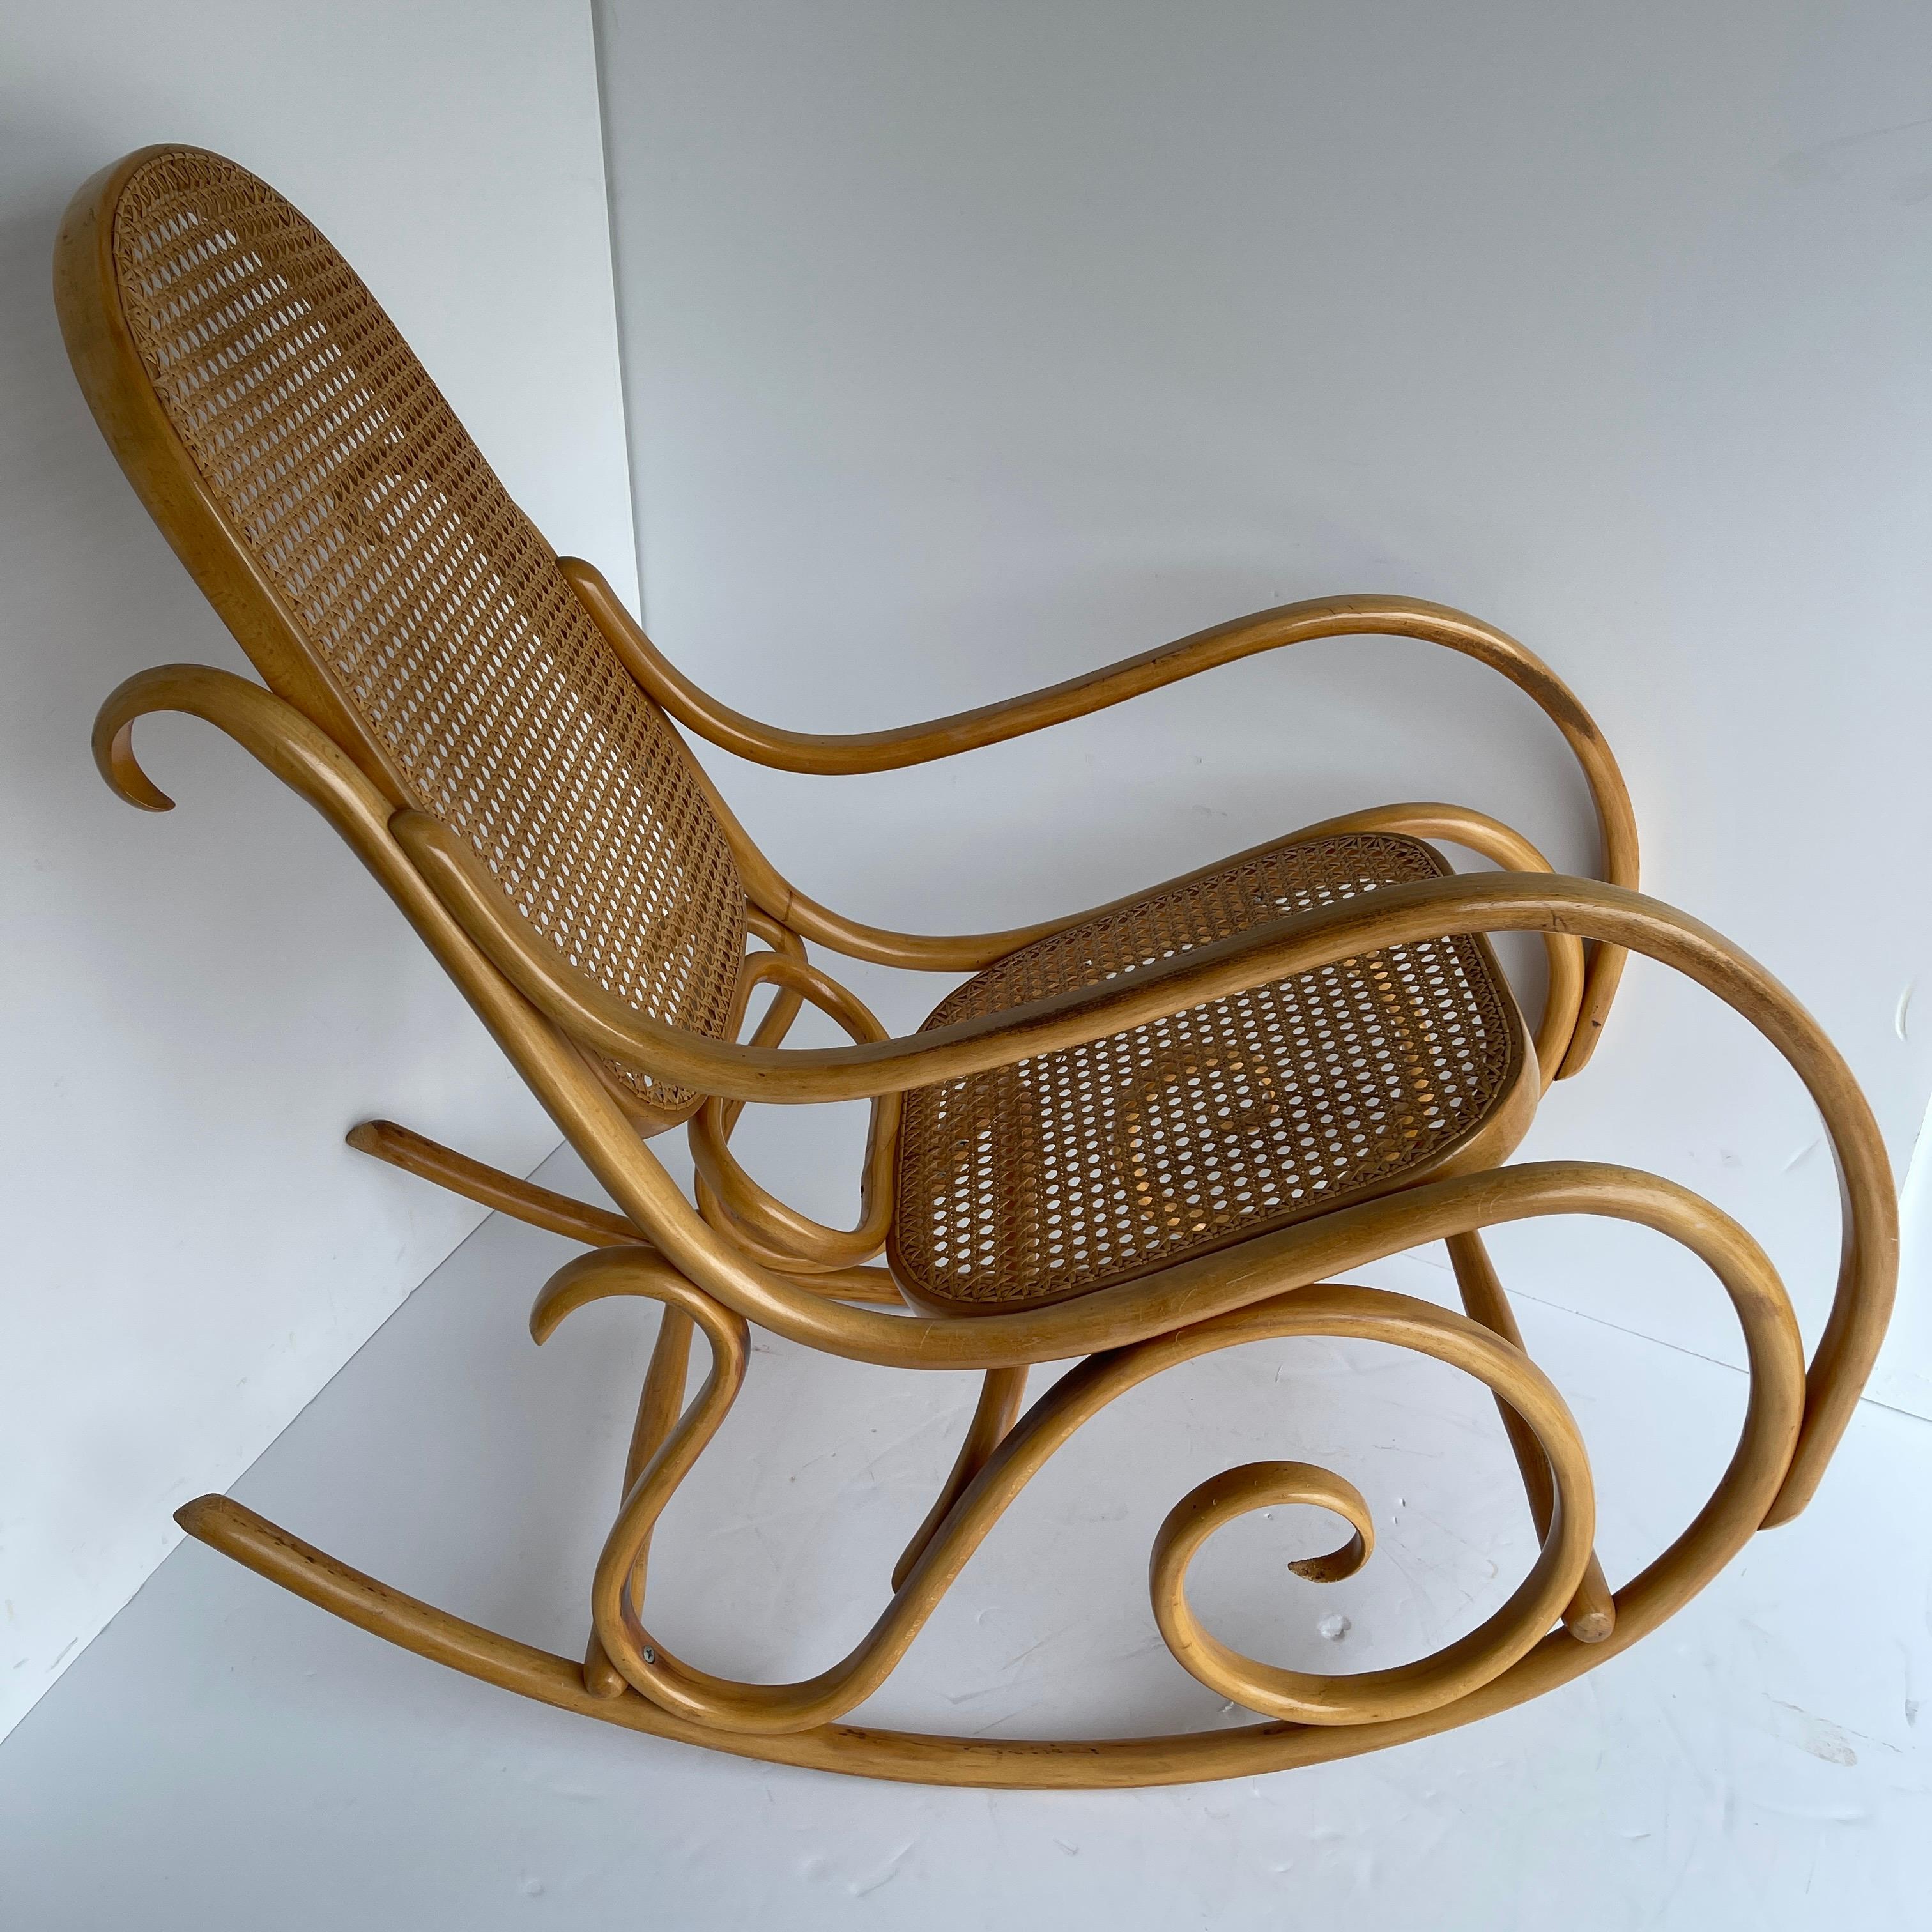 Late 20th century Thonet Schaukelstuhl rocking chair, made in Austria
Mid-Century Modern Thonet bentwood and cane rocking chair. This beautiful and graceful rocking chair features cane back and seat, bentwood frame. Michael Thonet chose to present